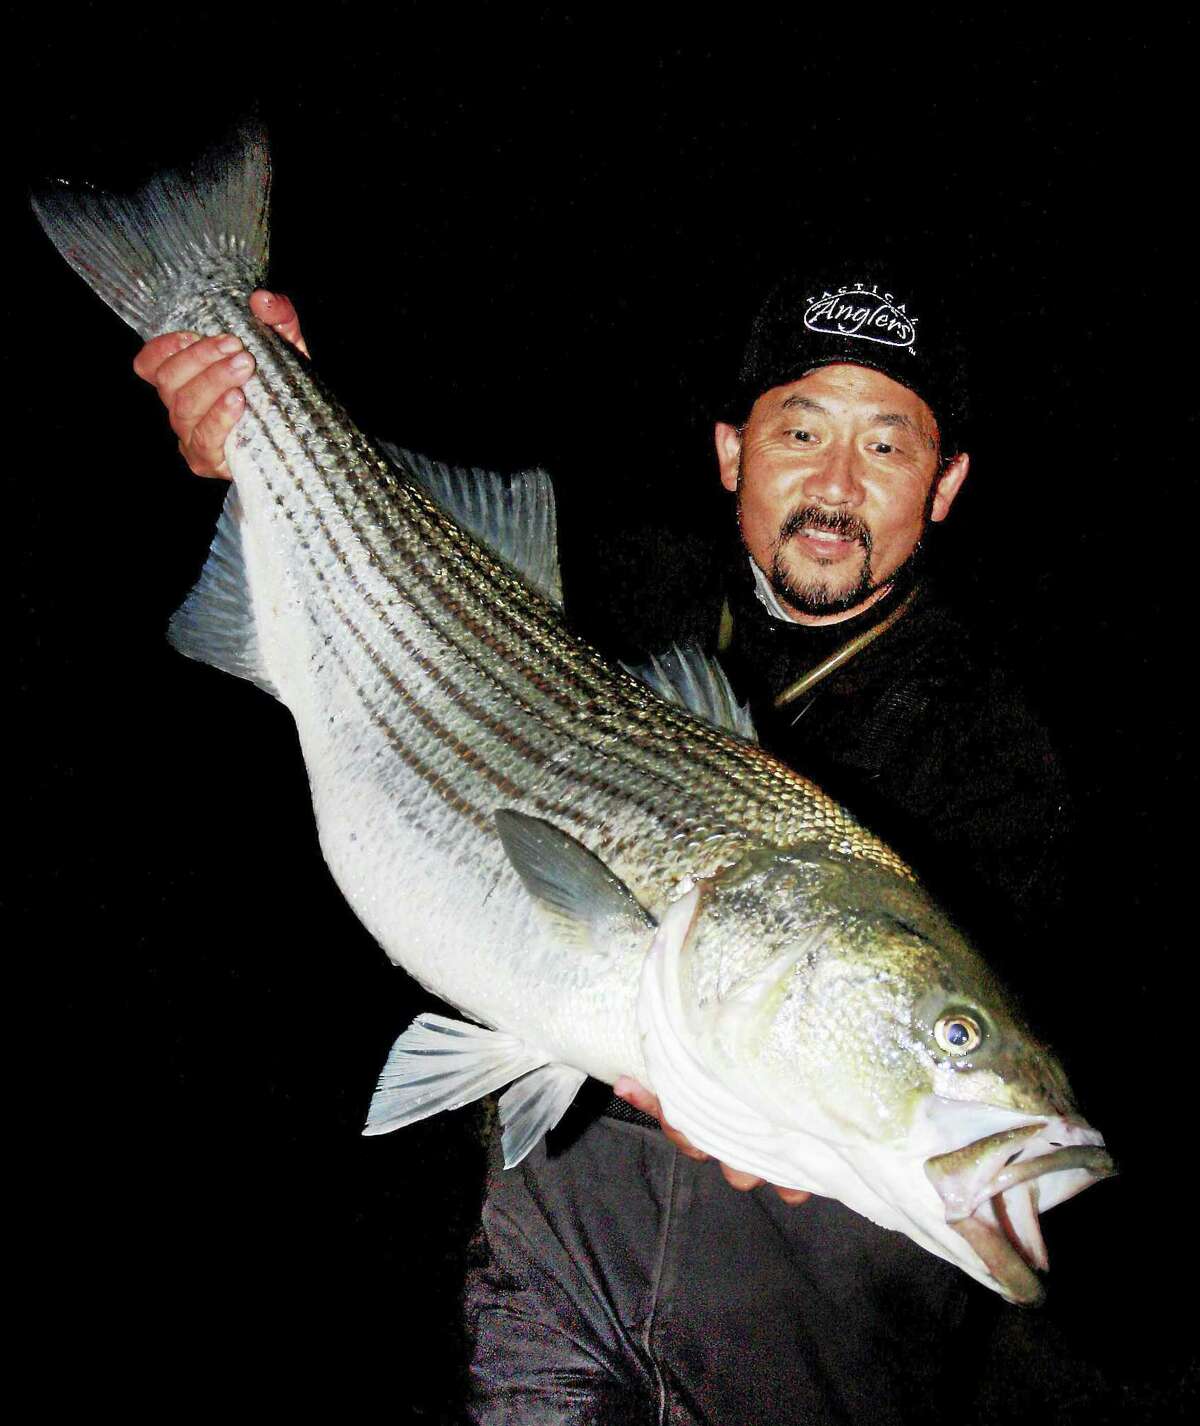 Contributed photo For the first time, the show will feature free seminars and a booth with Alberto Knie (a/k/a “Crazy Alberto”) – a world-class extreme trophy game fish hunter and writer/fishing product designer who specializes in the art of Trophy Fishing and Conservation.